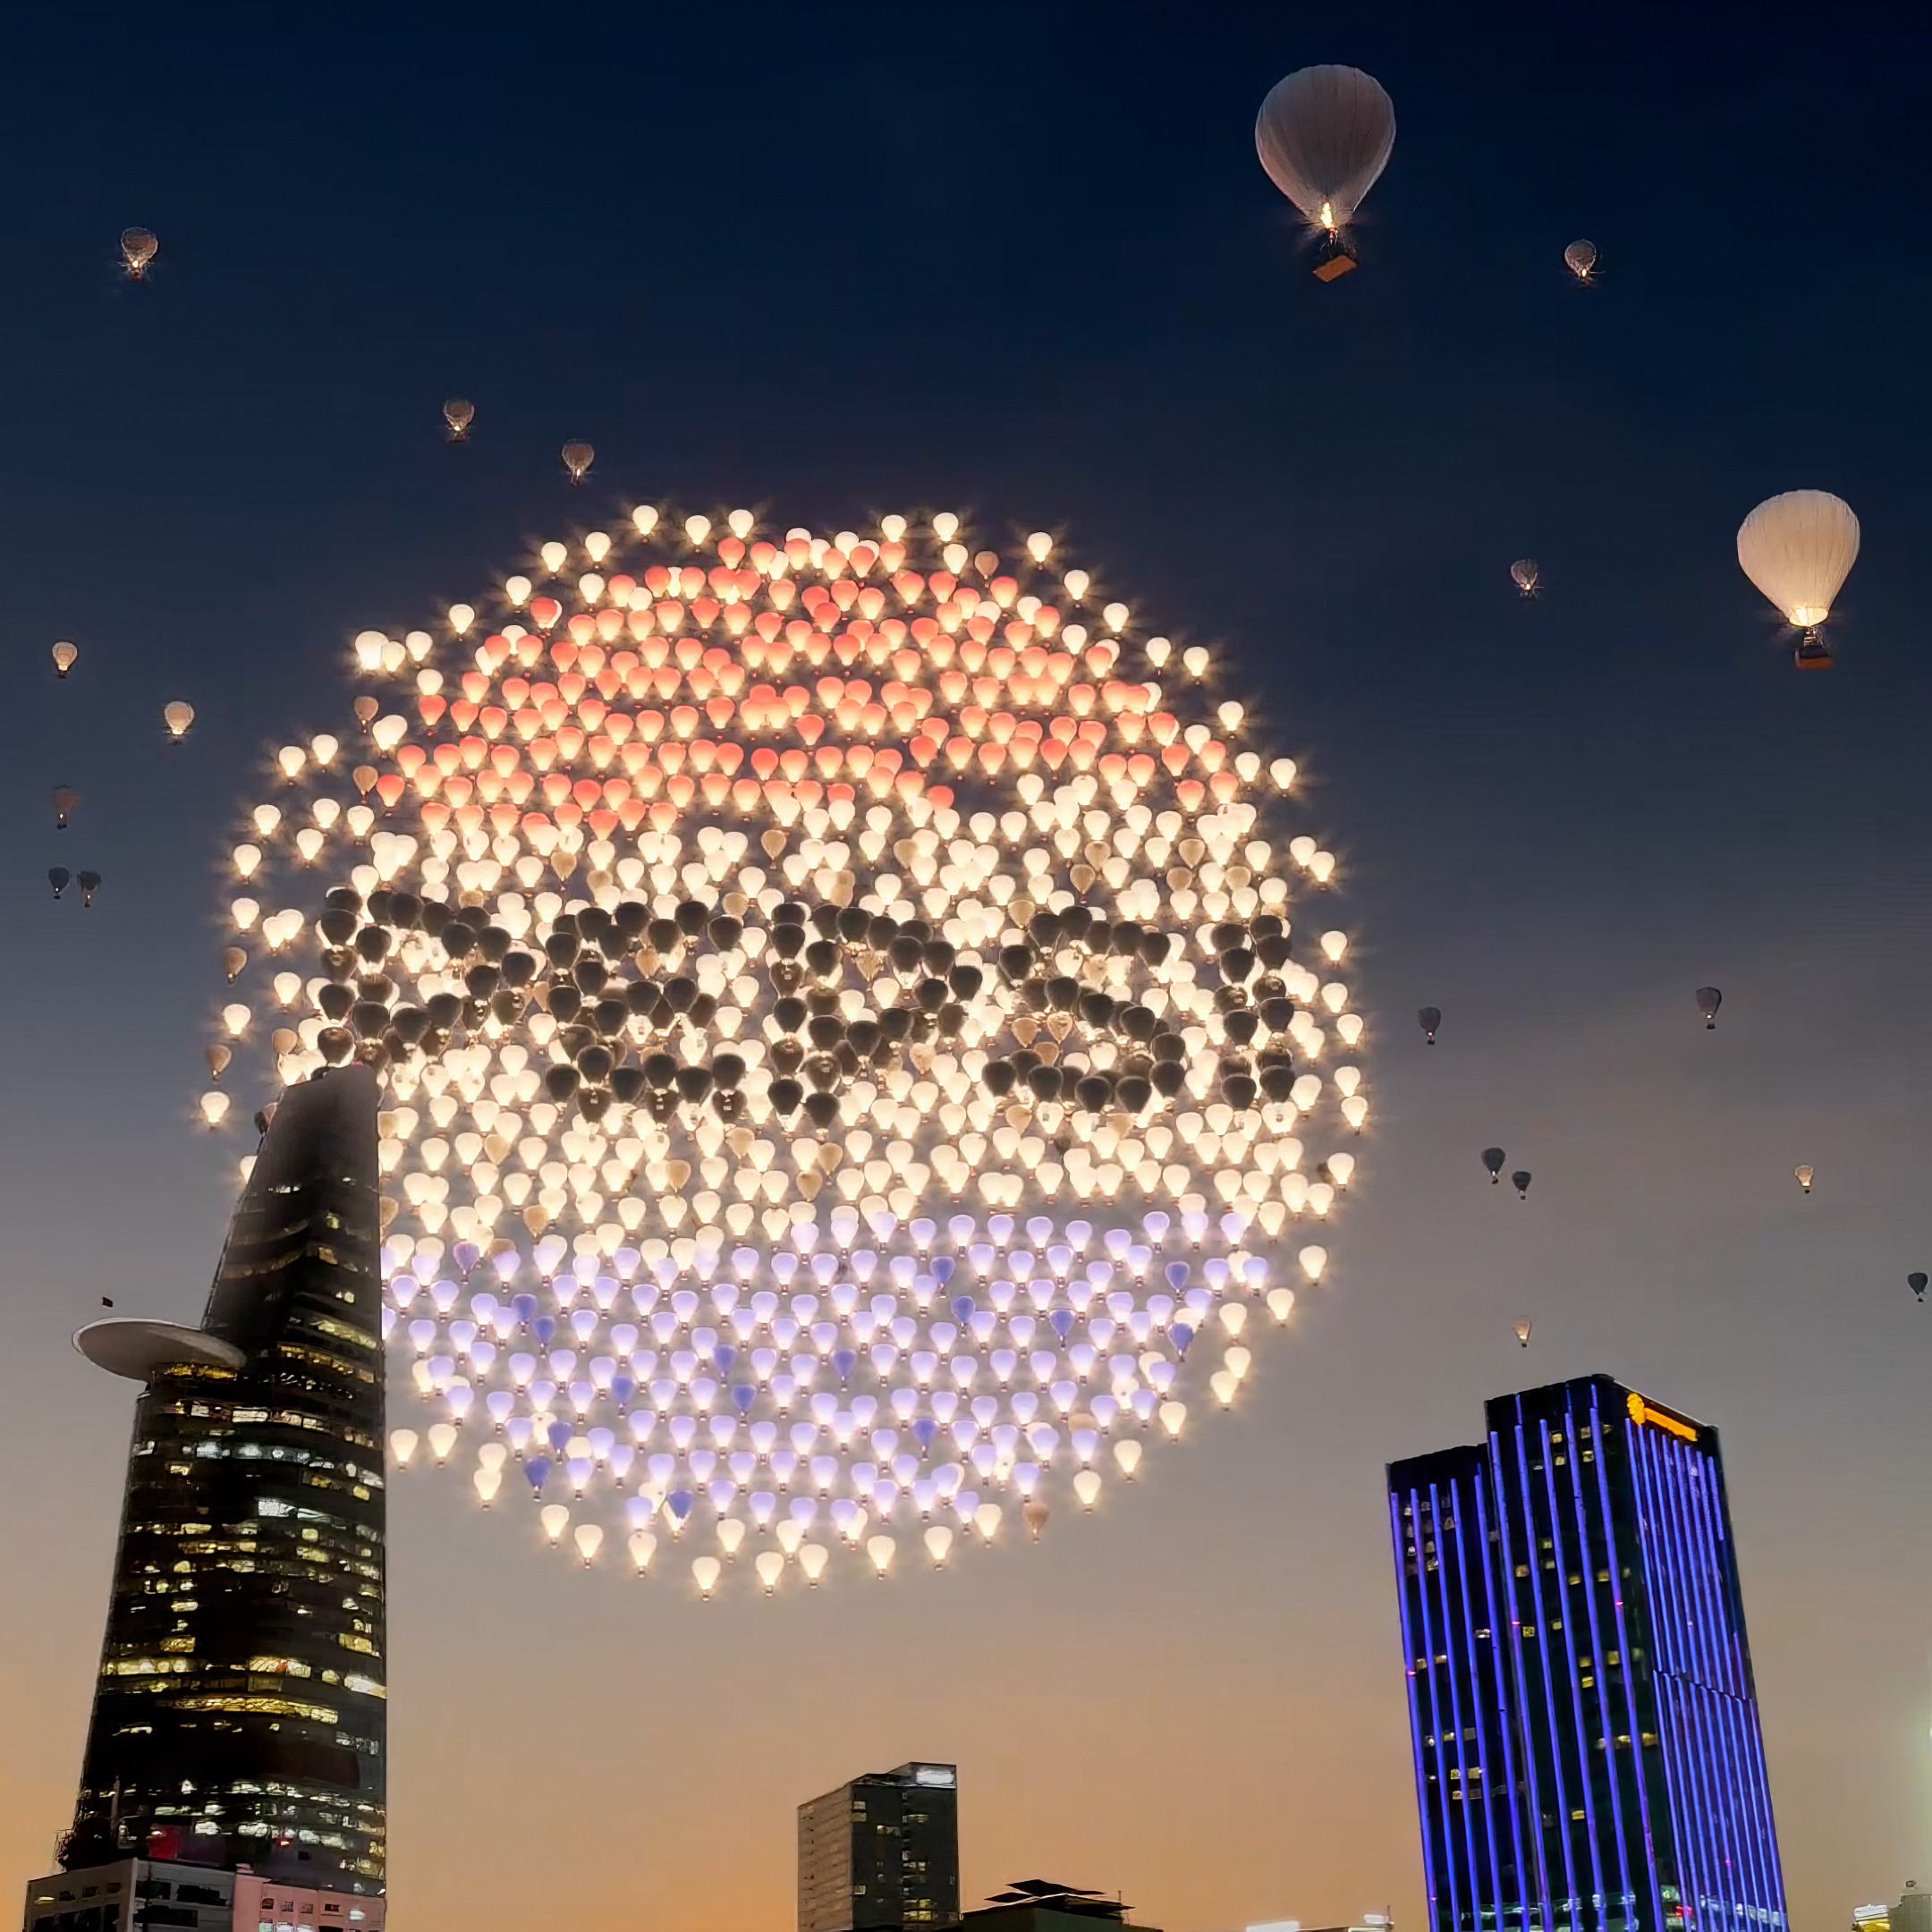 Hot air balloons create a large pattern in the sky above city skyline at dusk